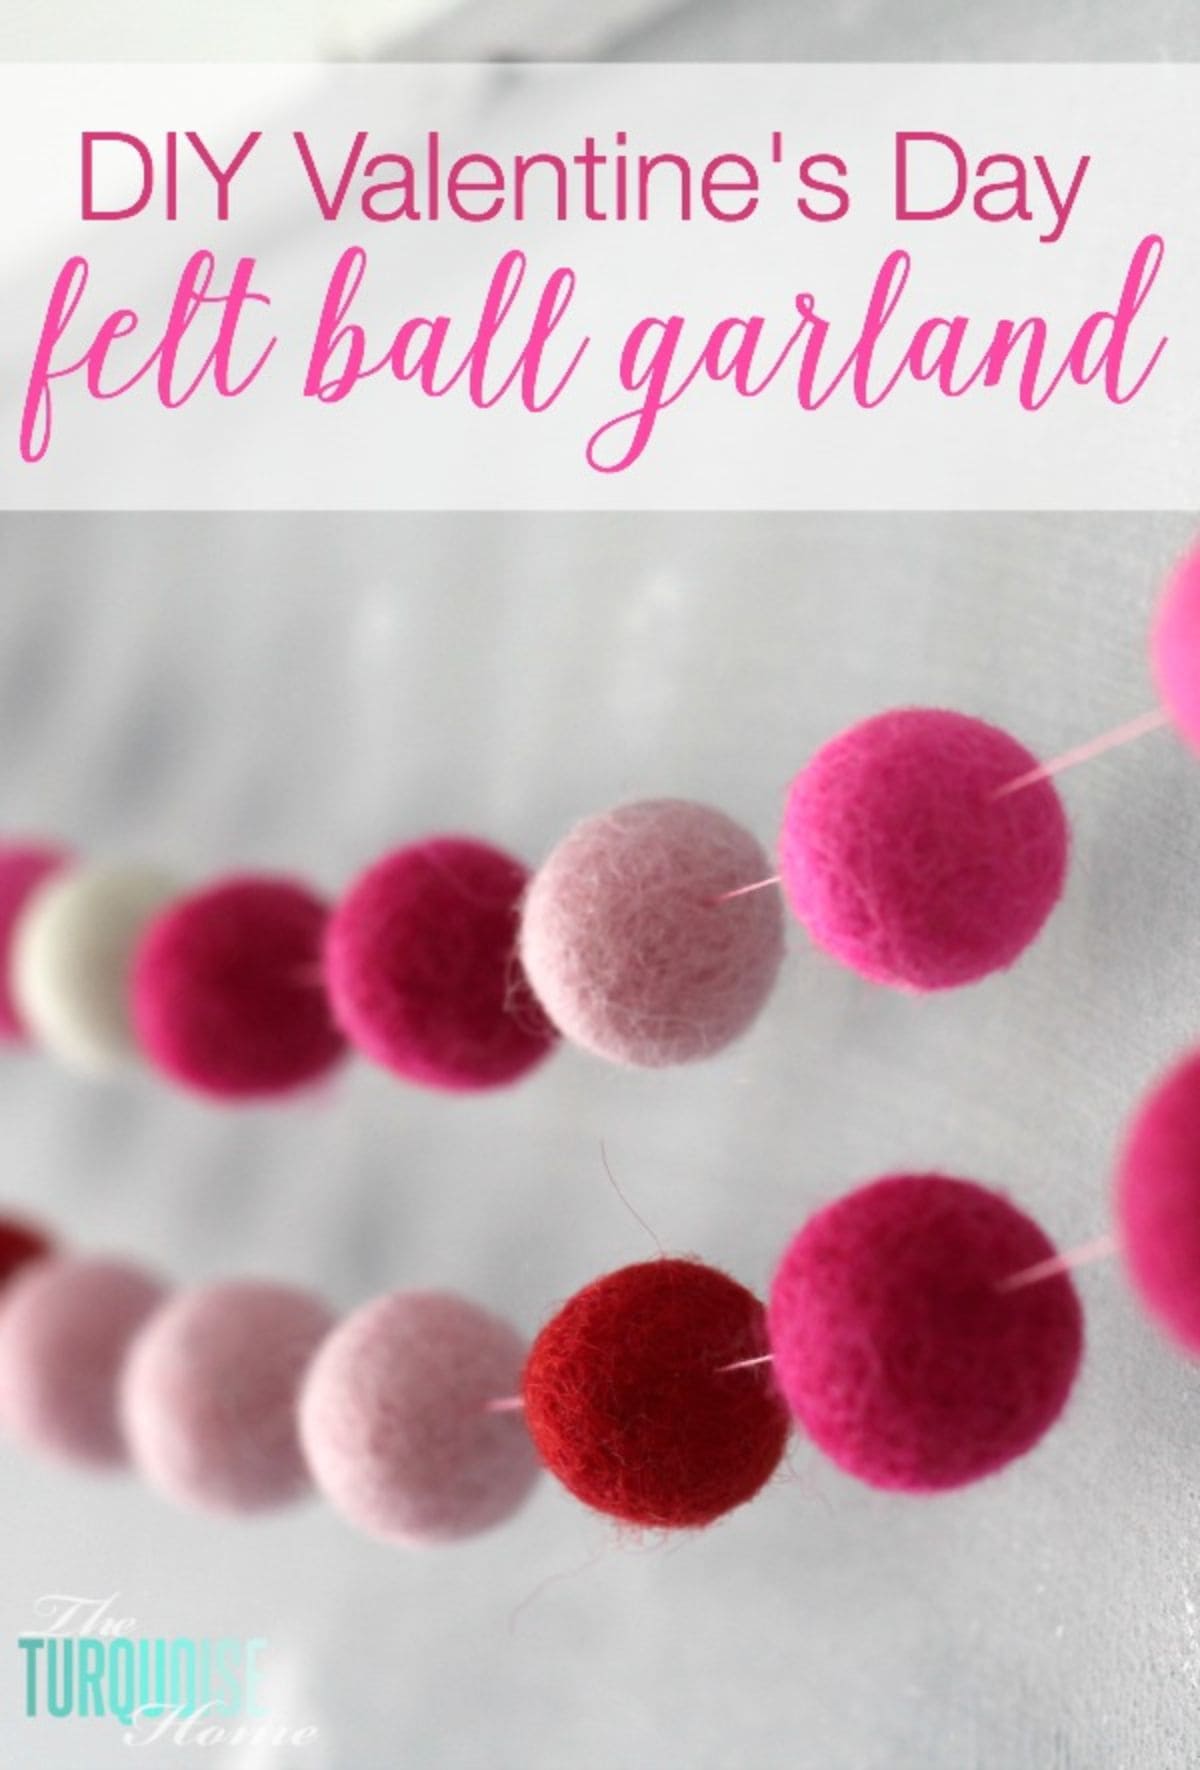 Under the text "DIY Valentine's felt ball garland" is a cream background with 2 strongs of felt balls in pinks and whites and reds